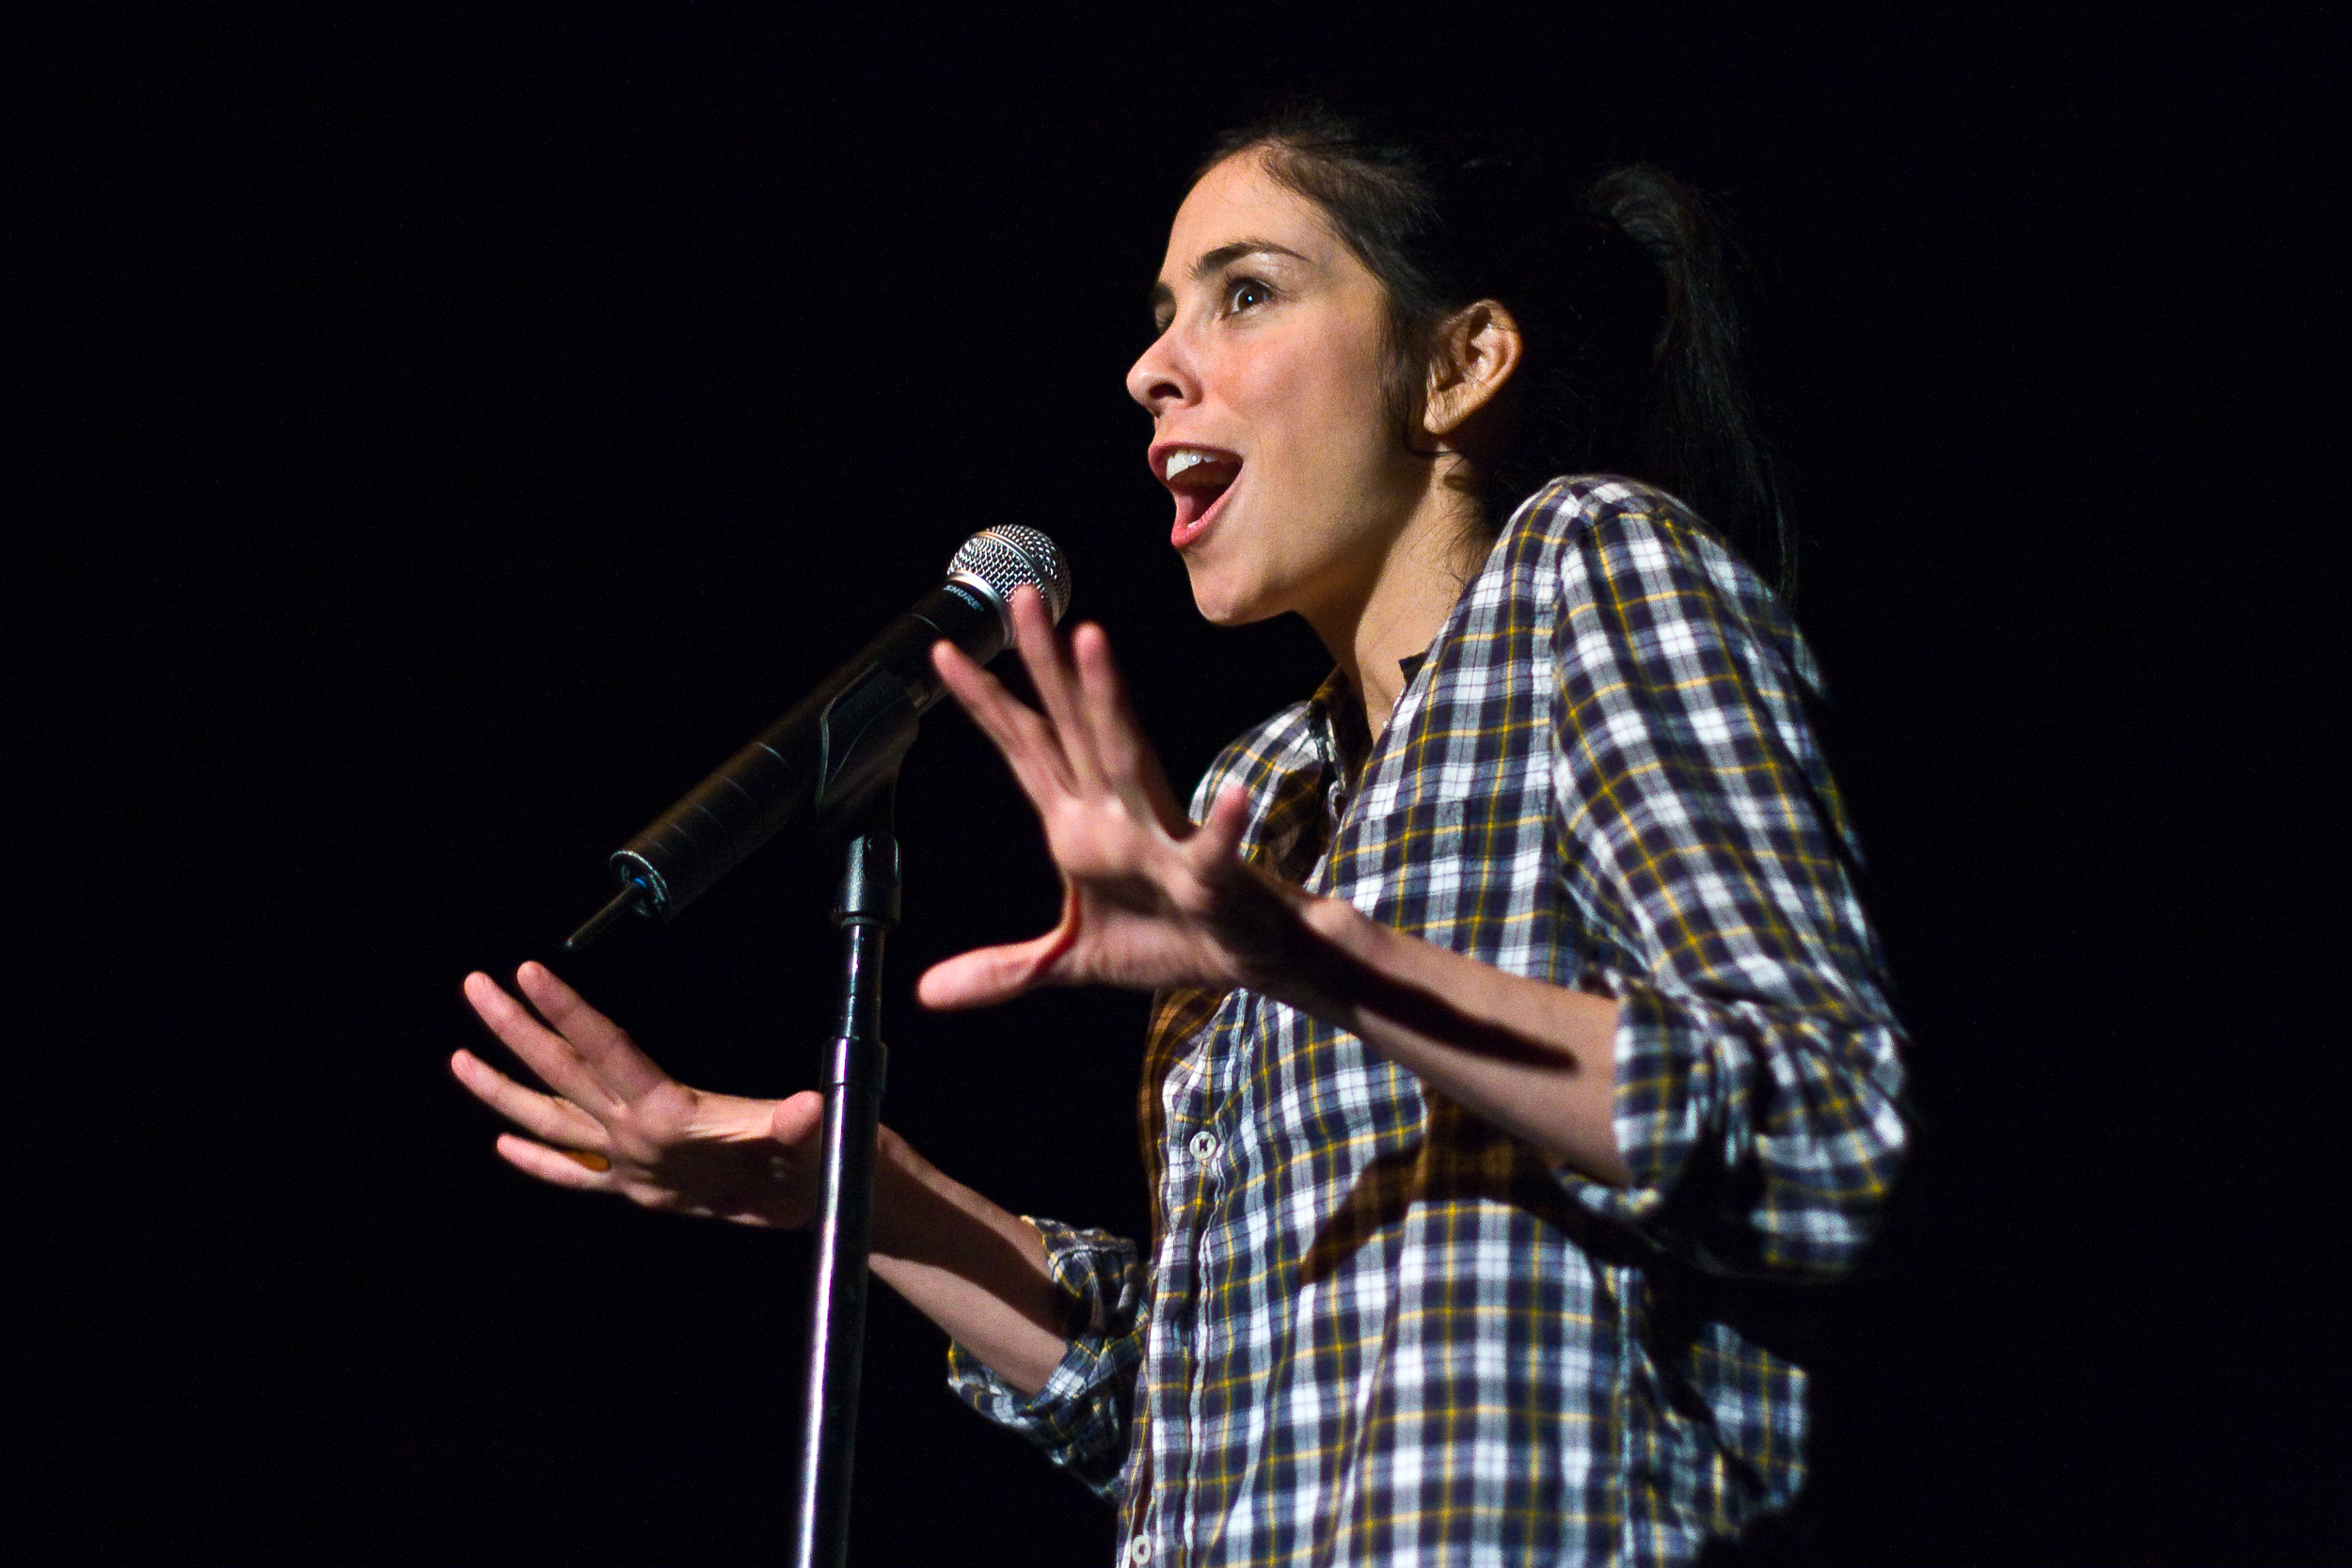  Sarah Silverman performs at the Bentsen Ball at Lincoln Theatre in Washington, D.C., Oct. 25, 2009. 